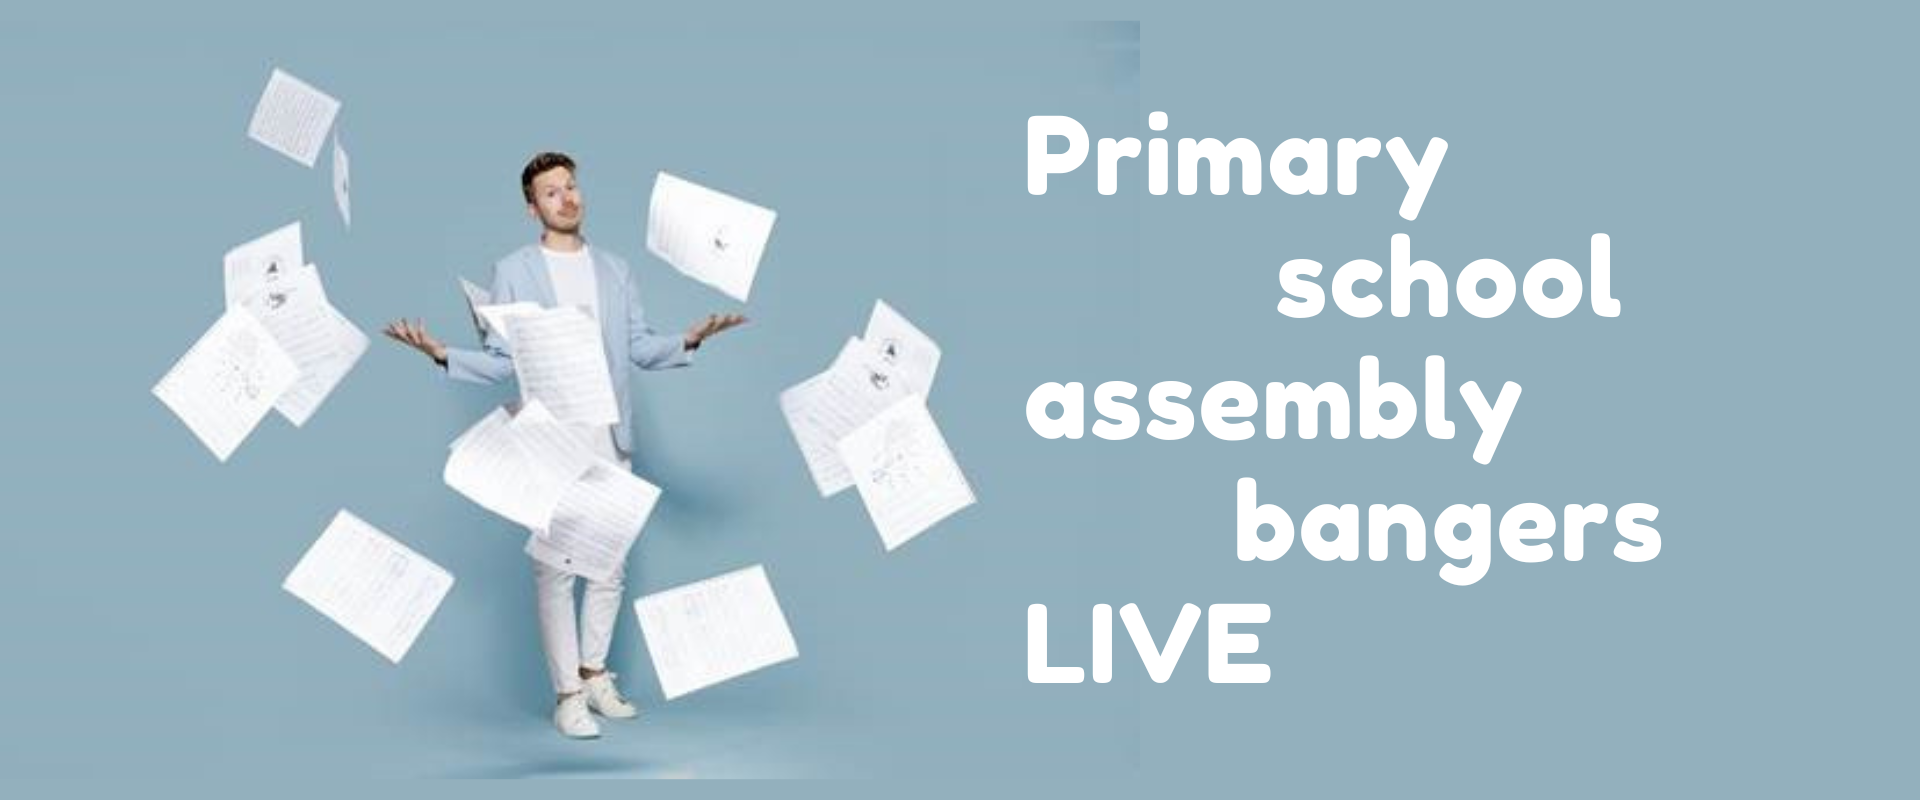 James B Partridge Presents: Primary School Assembly Bangers Live!